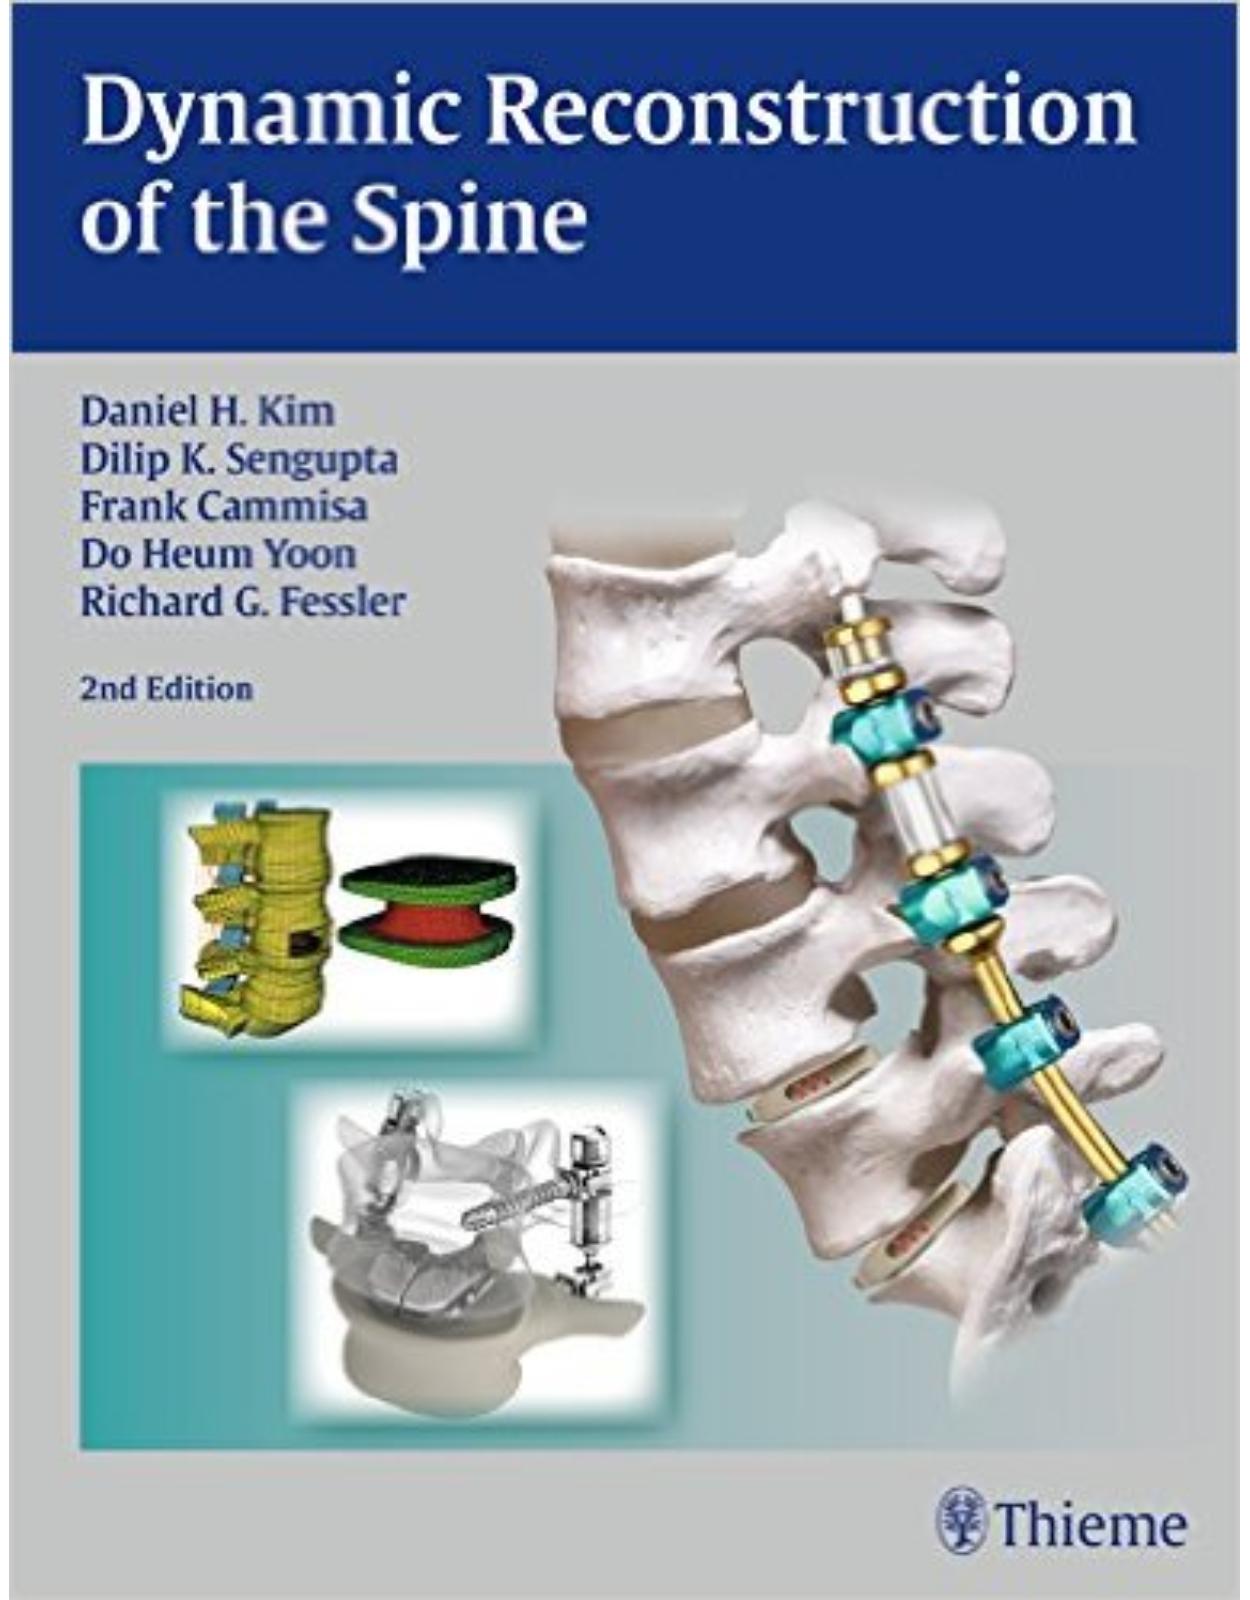 Dynamic Reconstruction of the Spine 2nd Edition